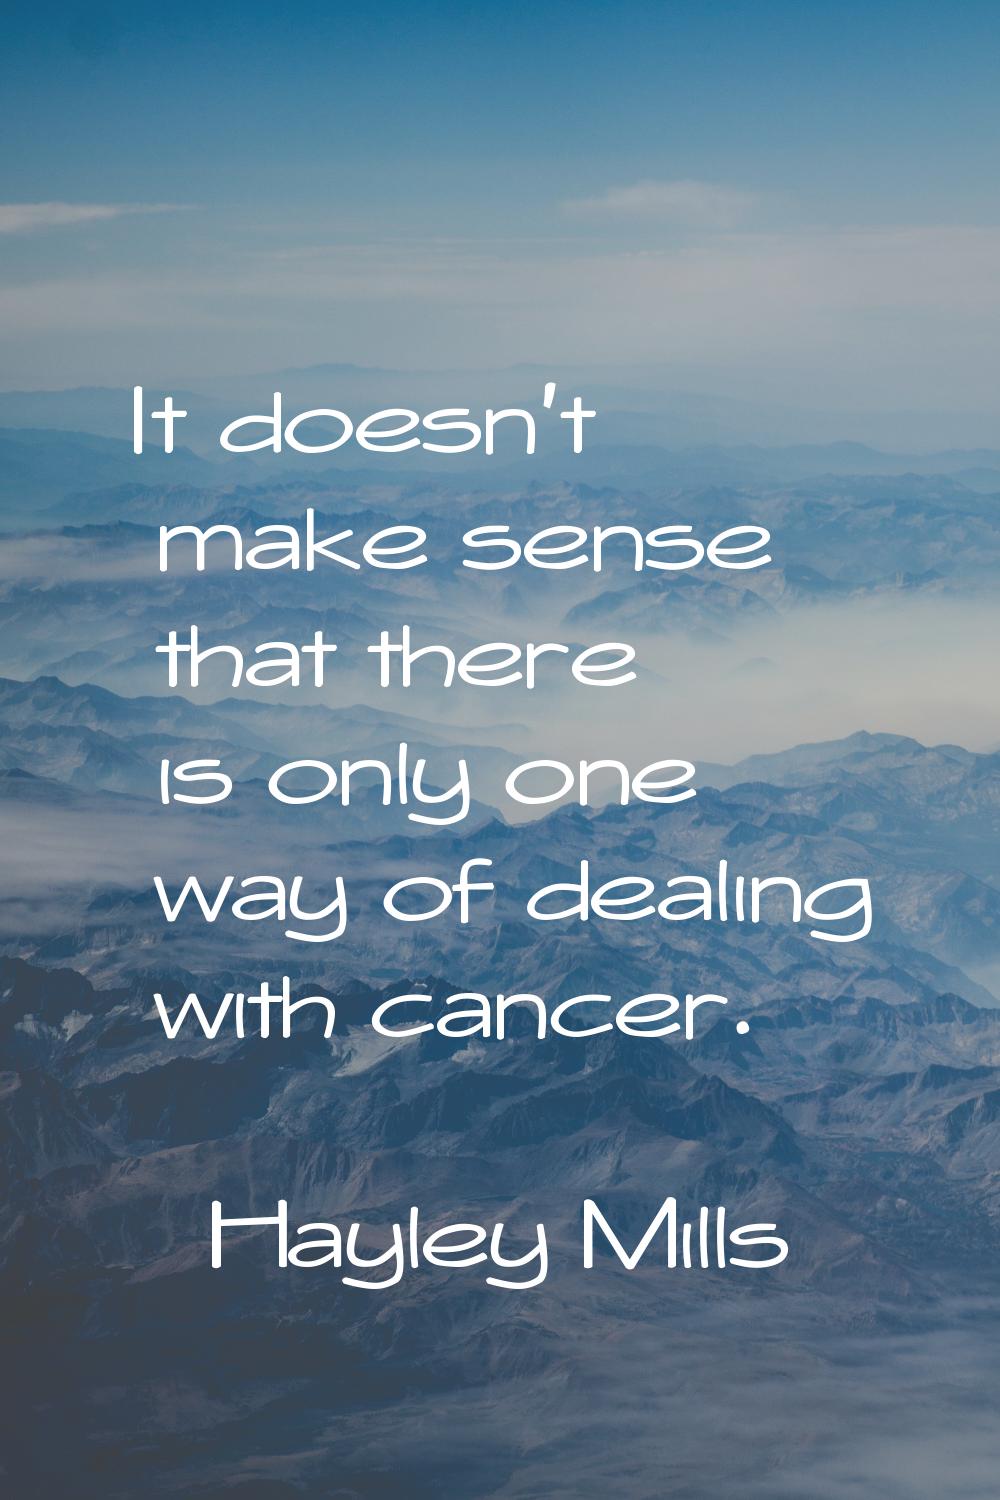 It doesn't make sense that there is only one way of dealing with cancer.